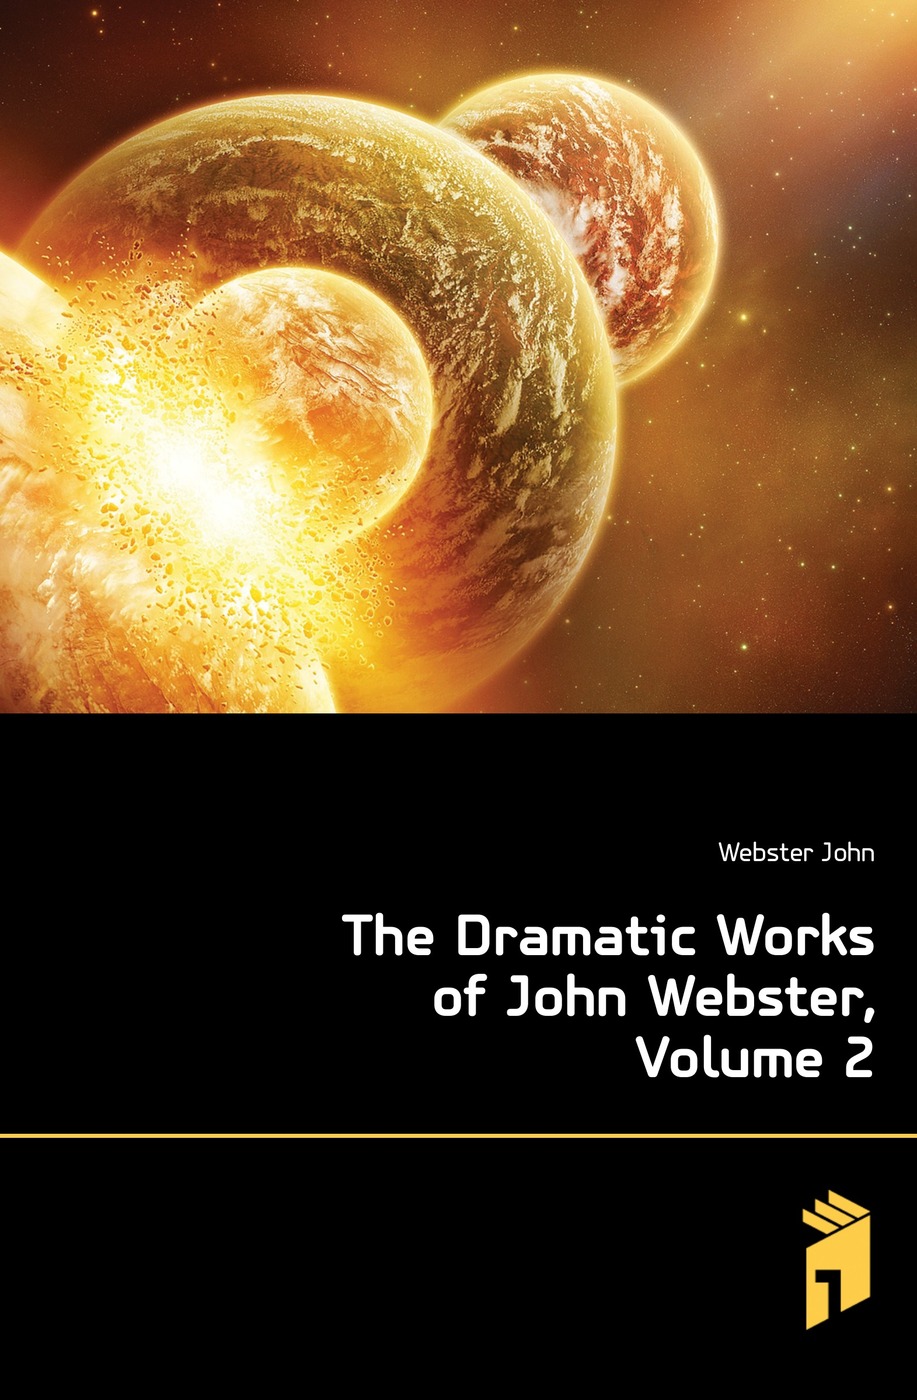 The Dramatic Works of John Webster, Volume 2